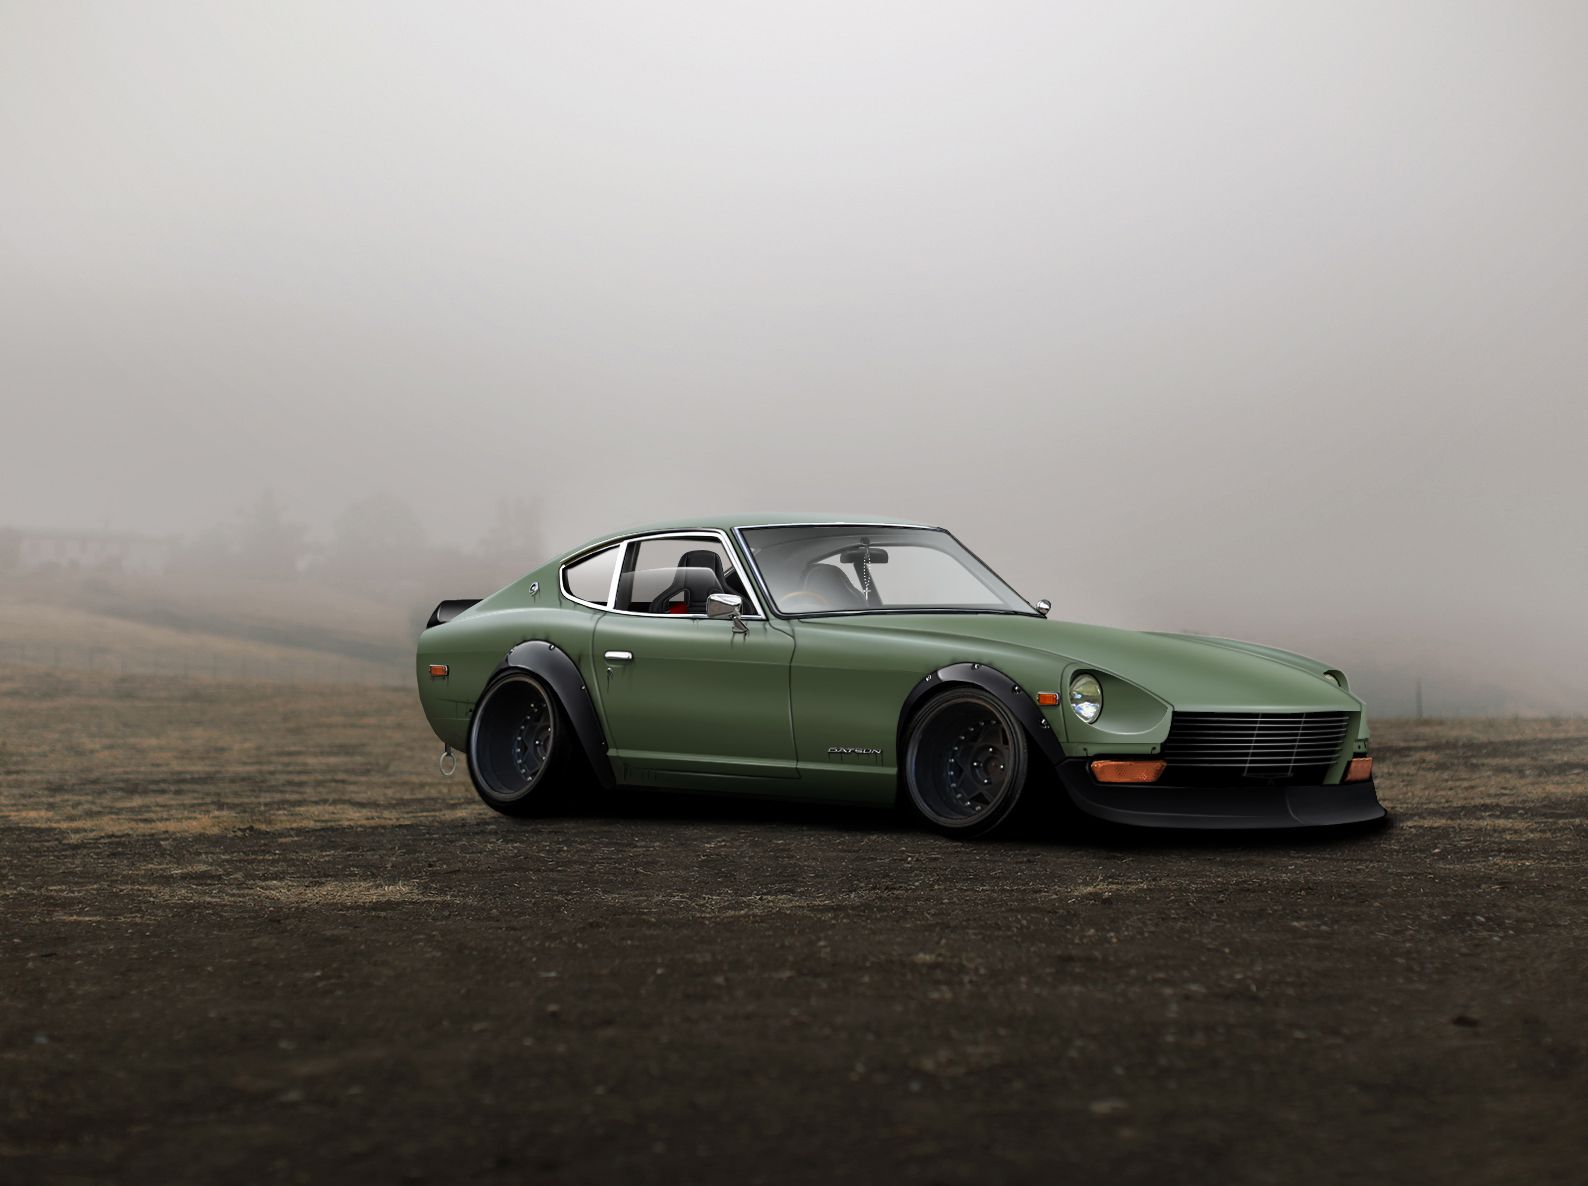 Nissan S30 Wallpaper High Resolution And Quality Cars